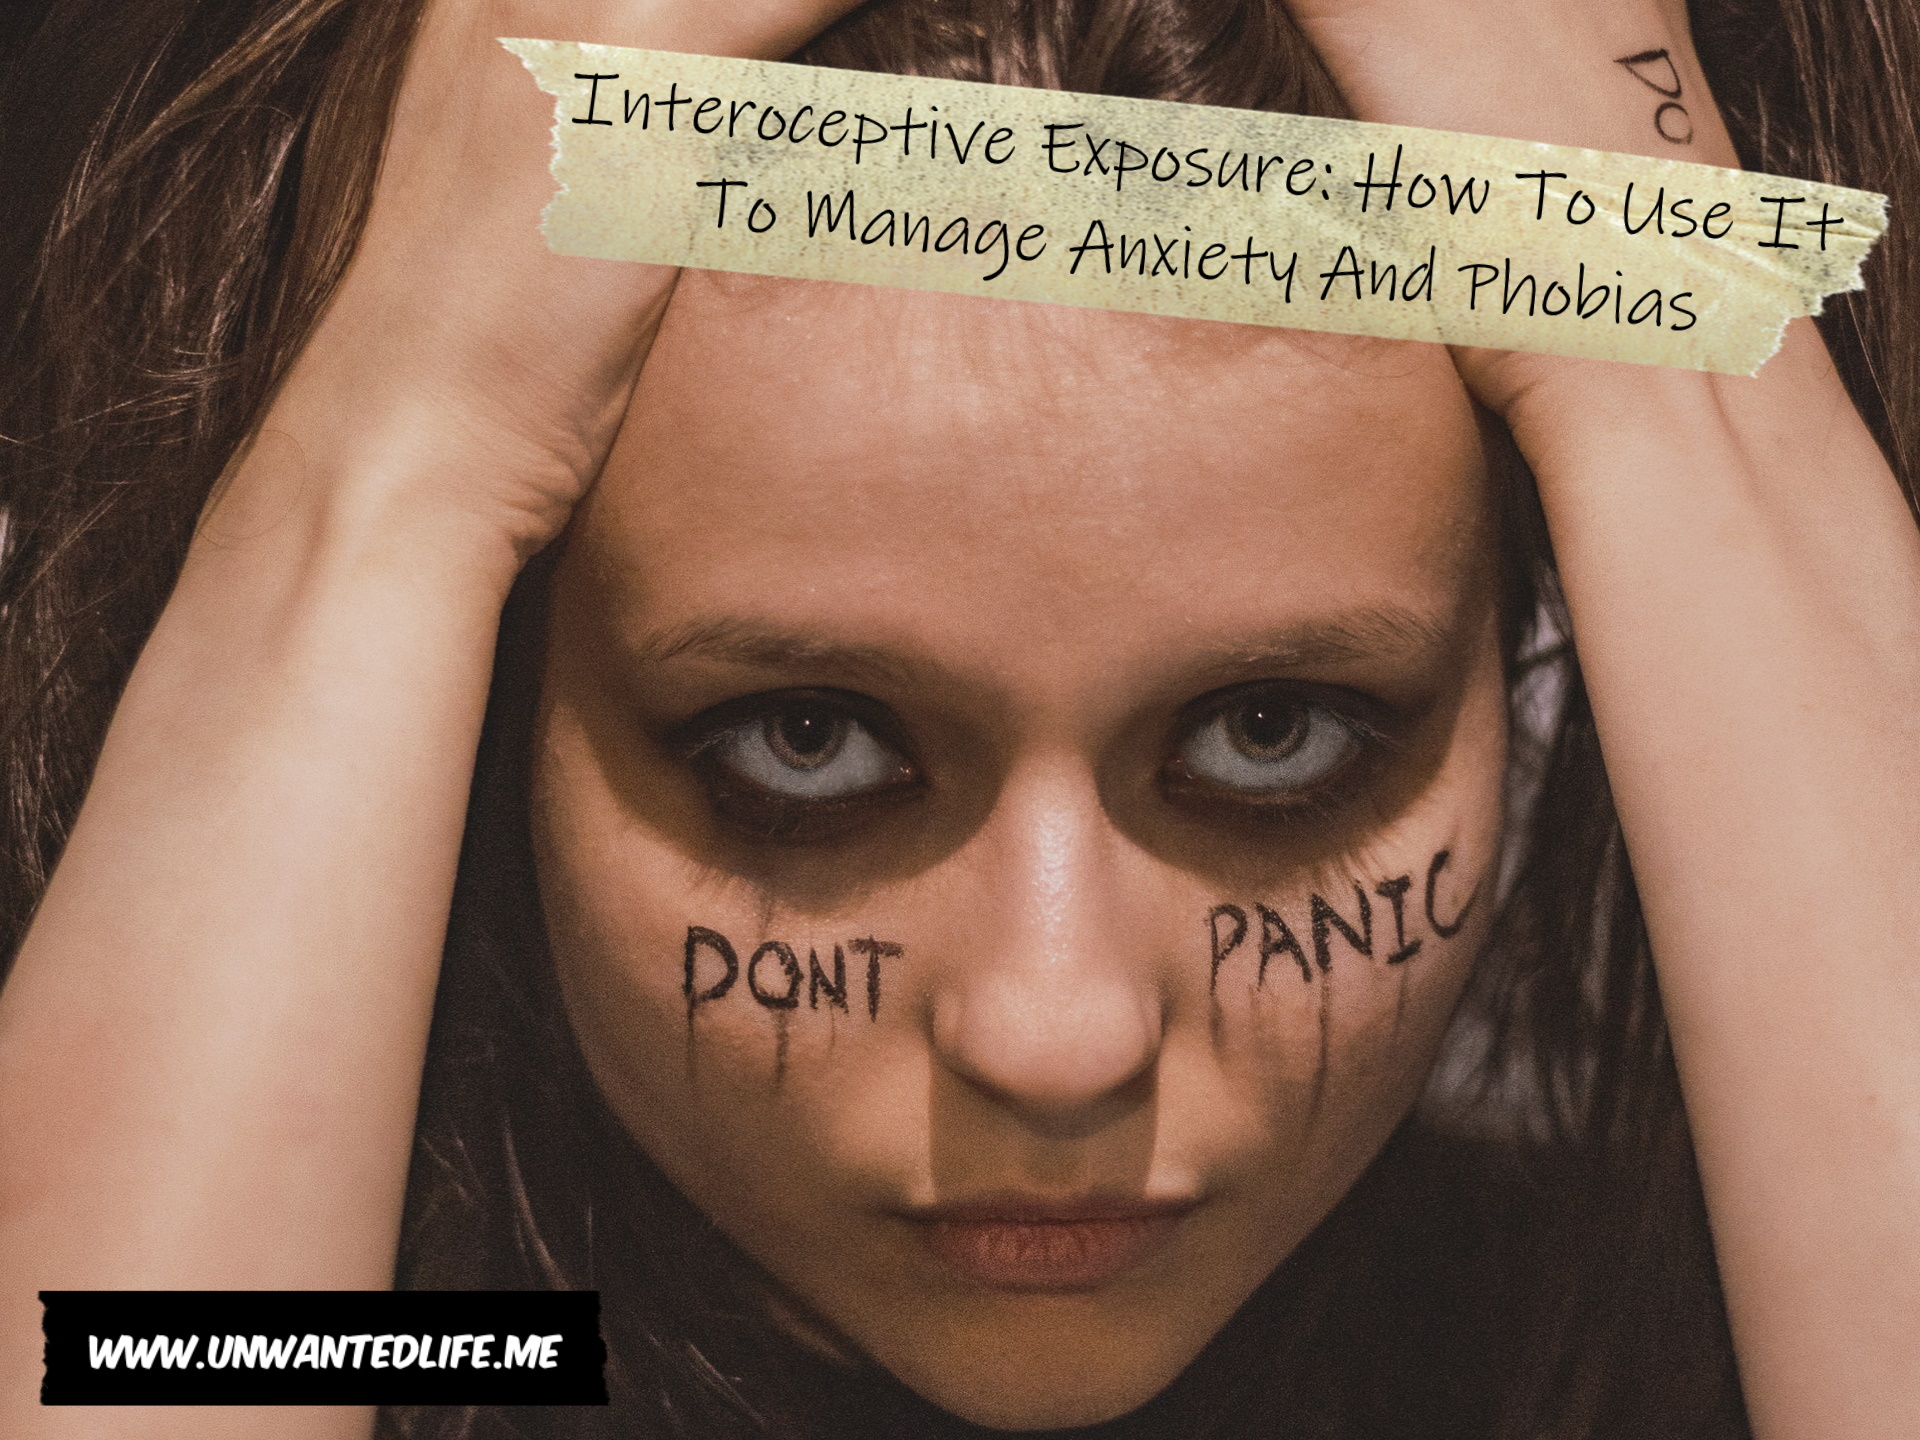 A photo of a white woman with her head in her hand and "don't panic" wrote across her face and "do" on her left hand to represent the topic of the article - Interoceptive Exposure: How To Use It To Manage Anxiety And Phobias